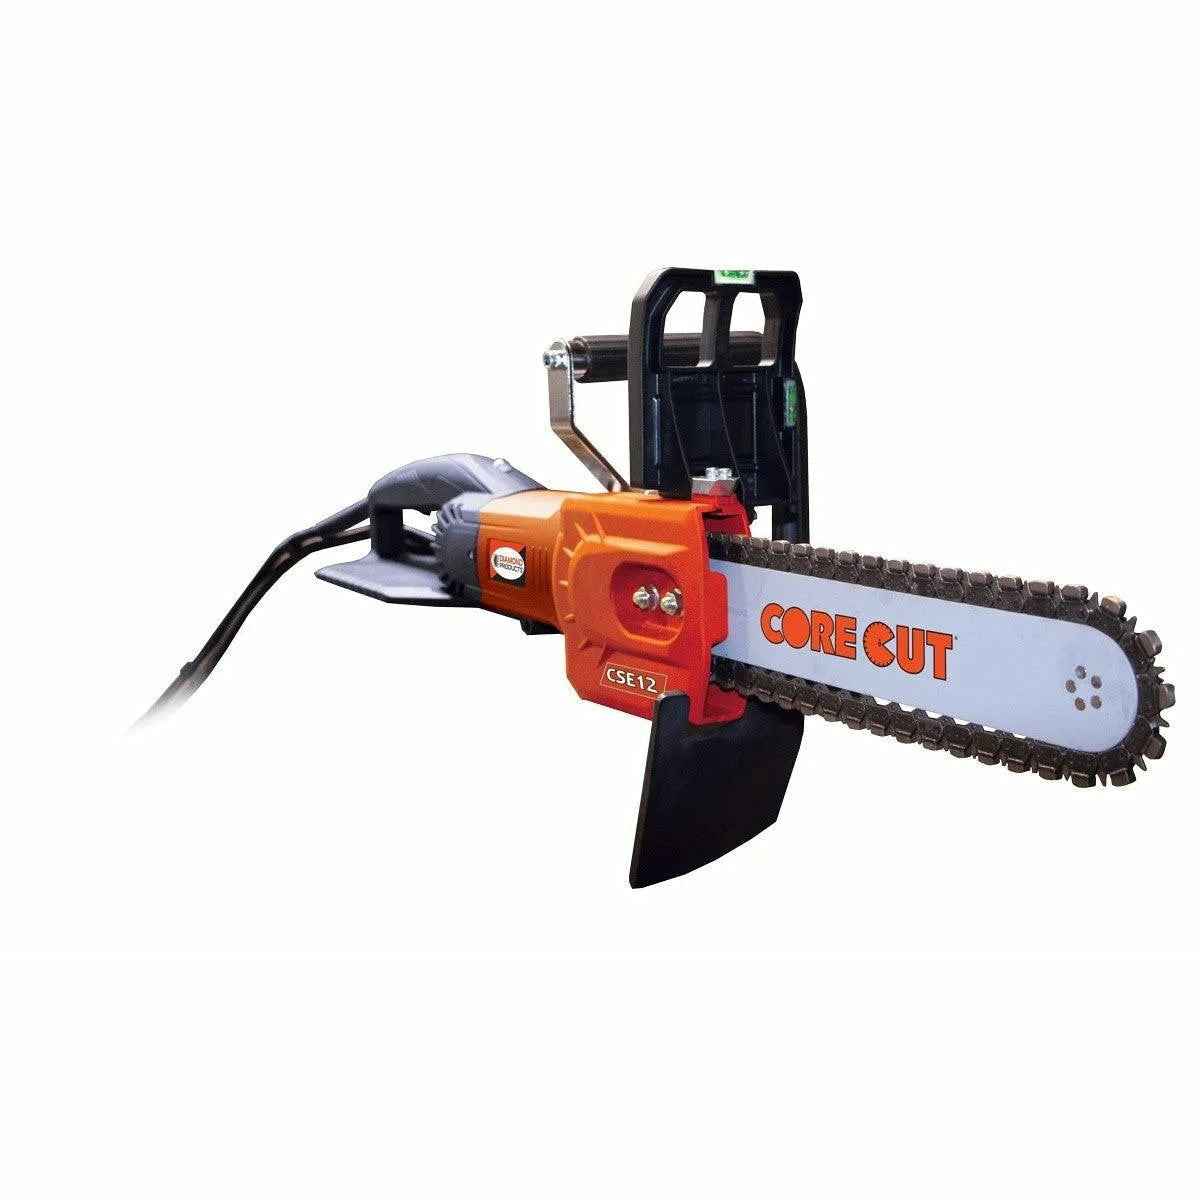 CSE12 ELECTRIC CHAINSAW 12" BAR AND CHAIN INCLUDED